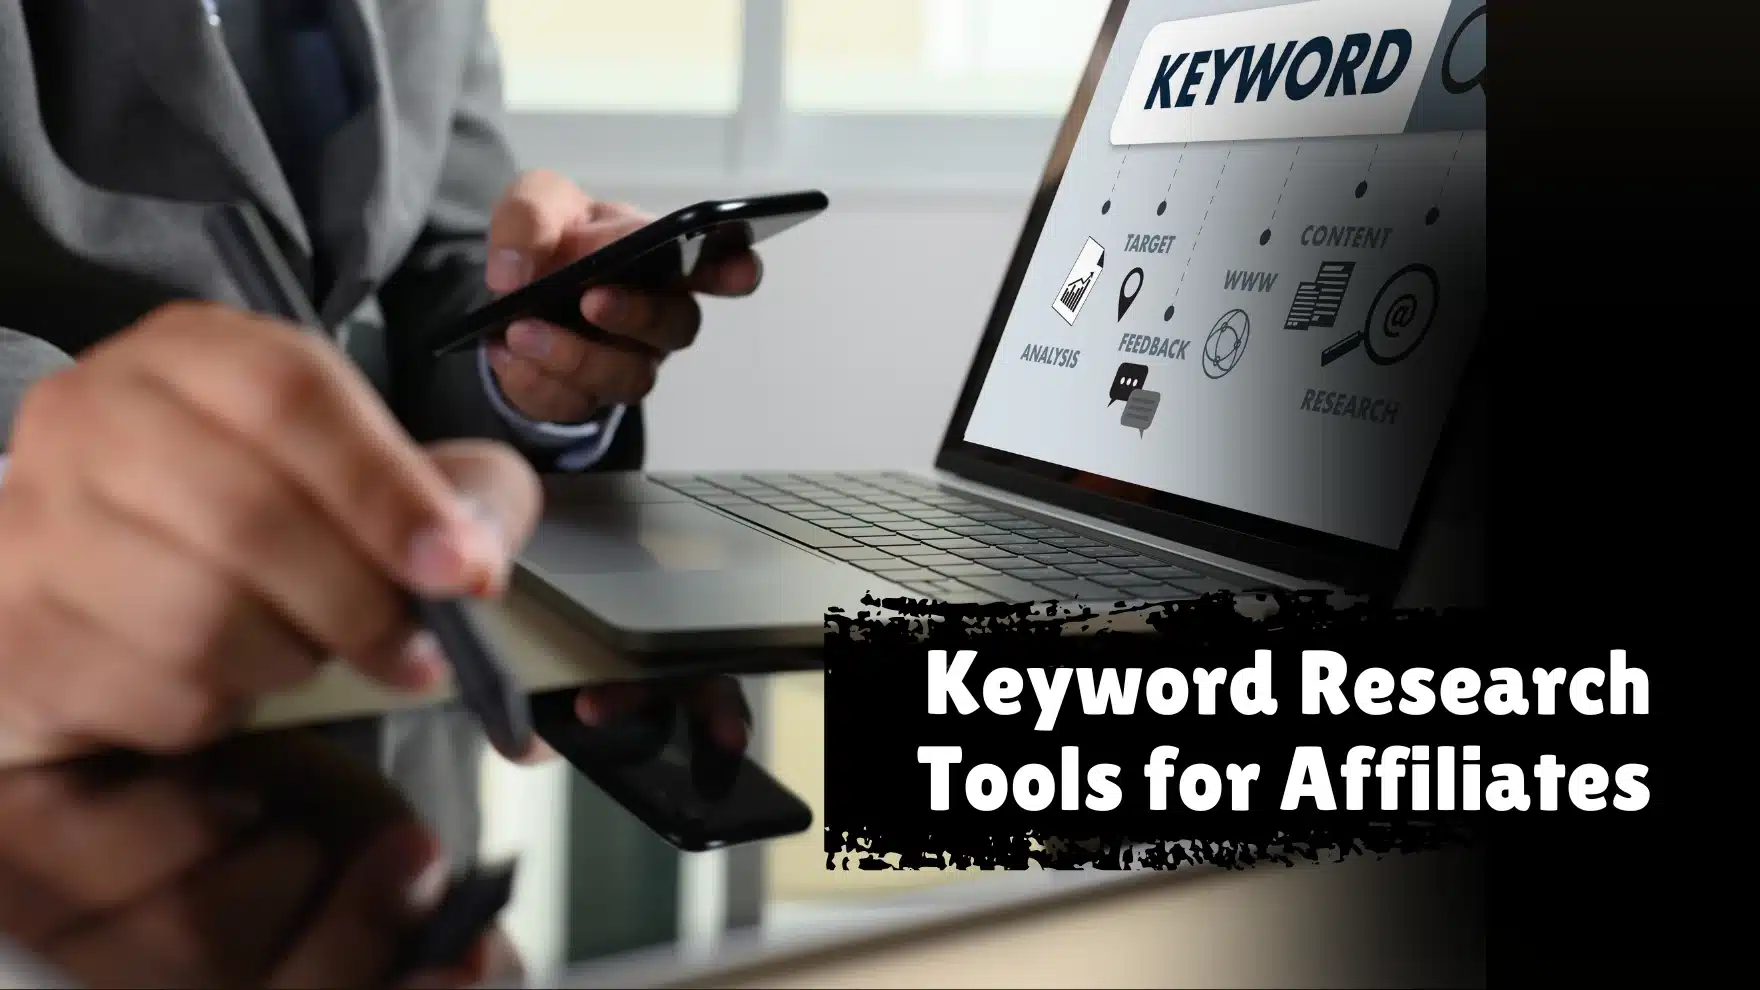 Keyword Research Tools for Affiliates